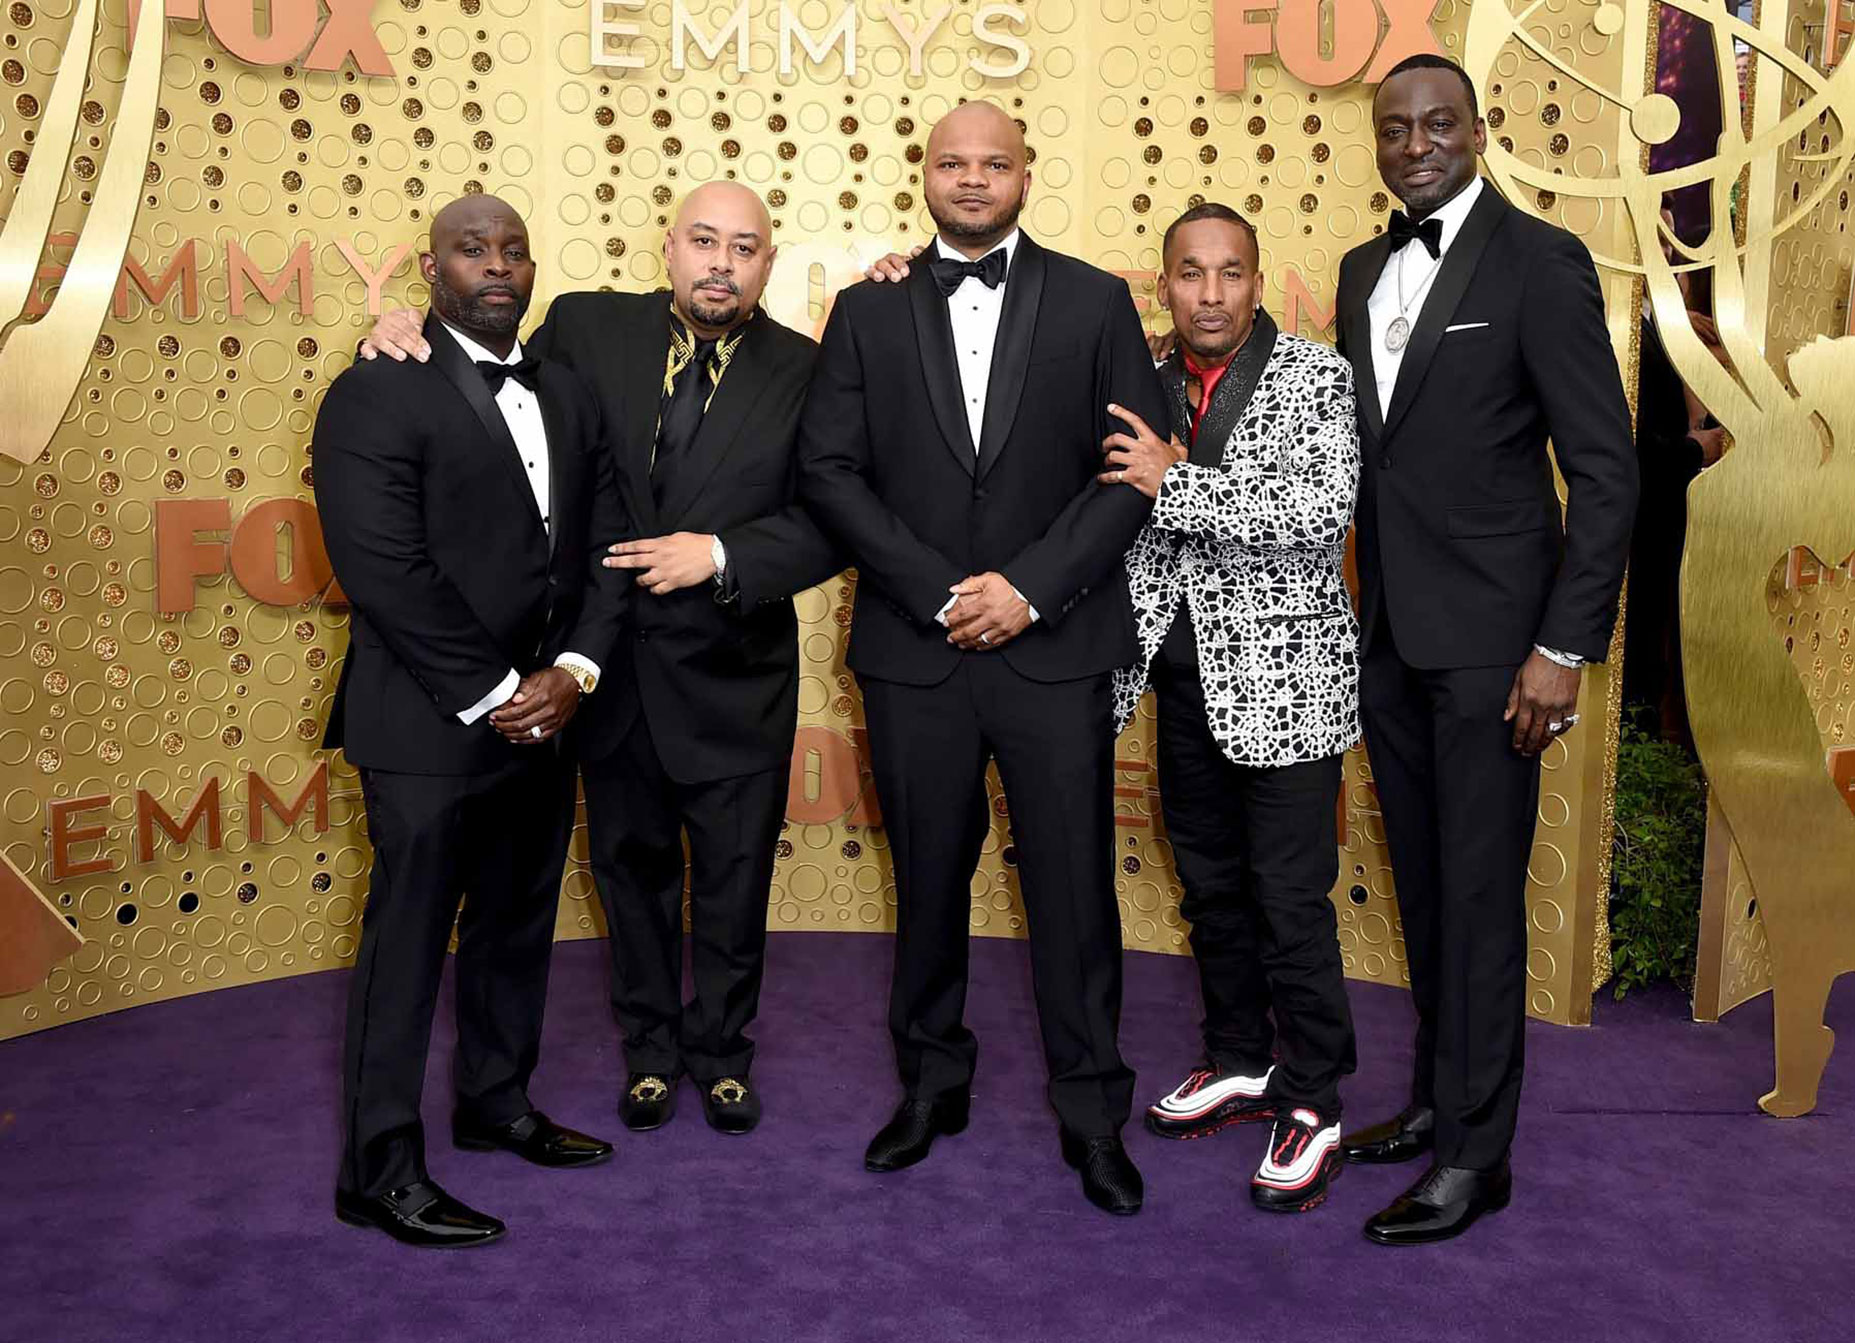 Central Park 5 at the 2019 Emmys